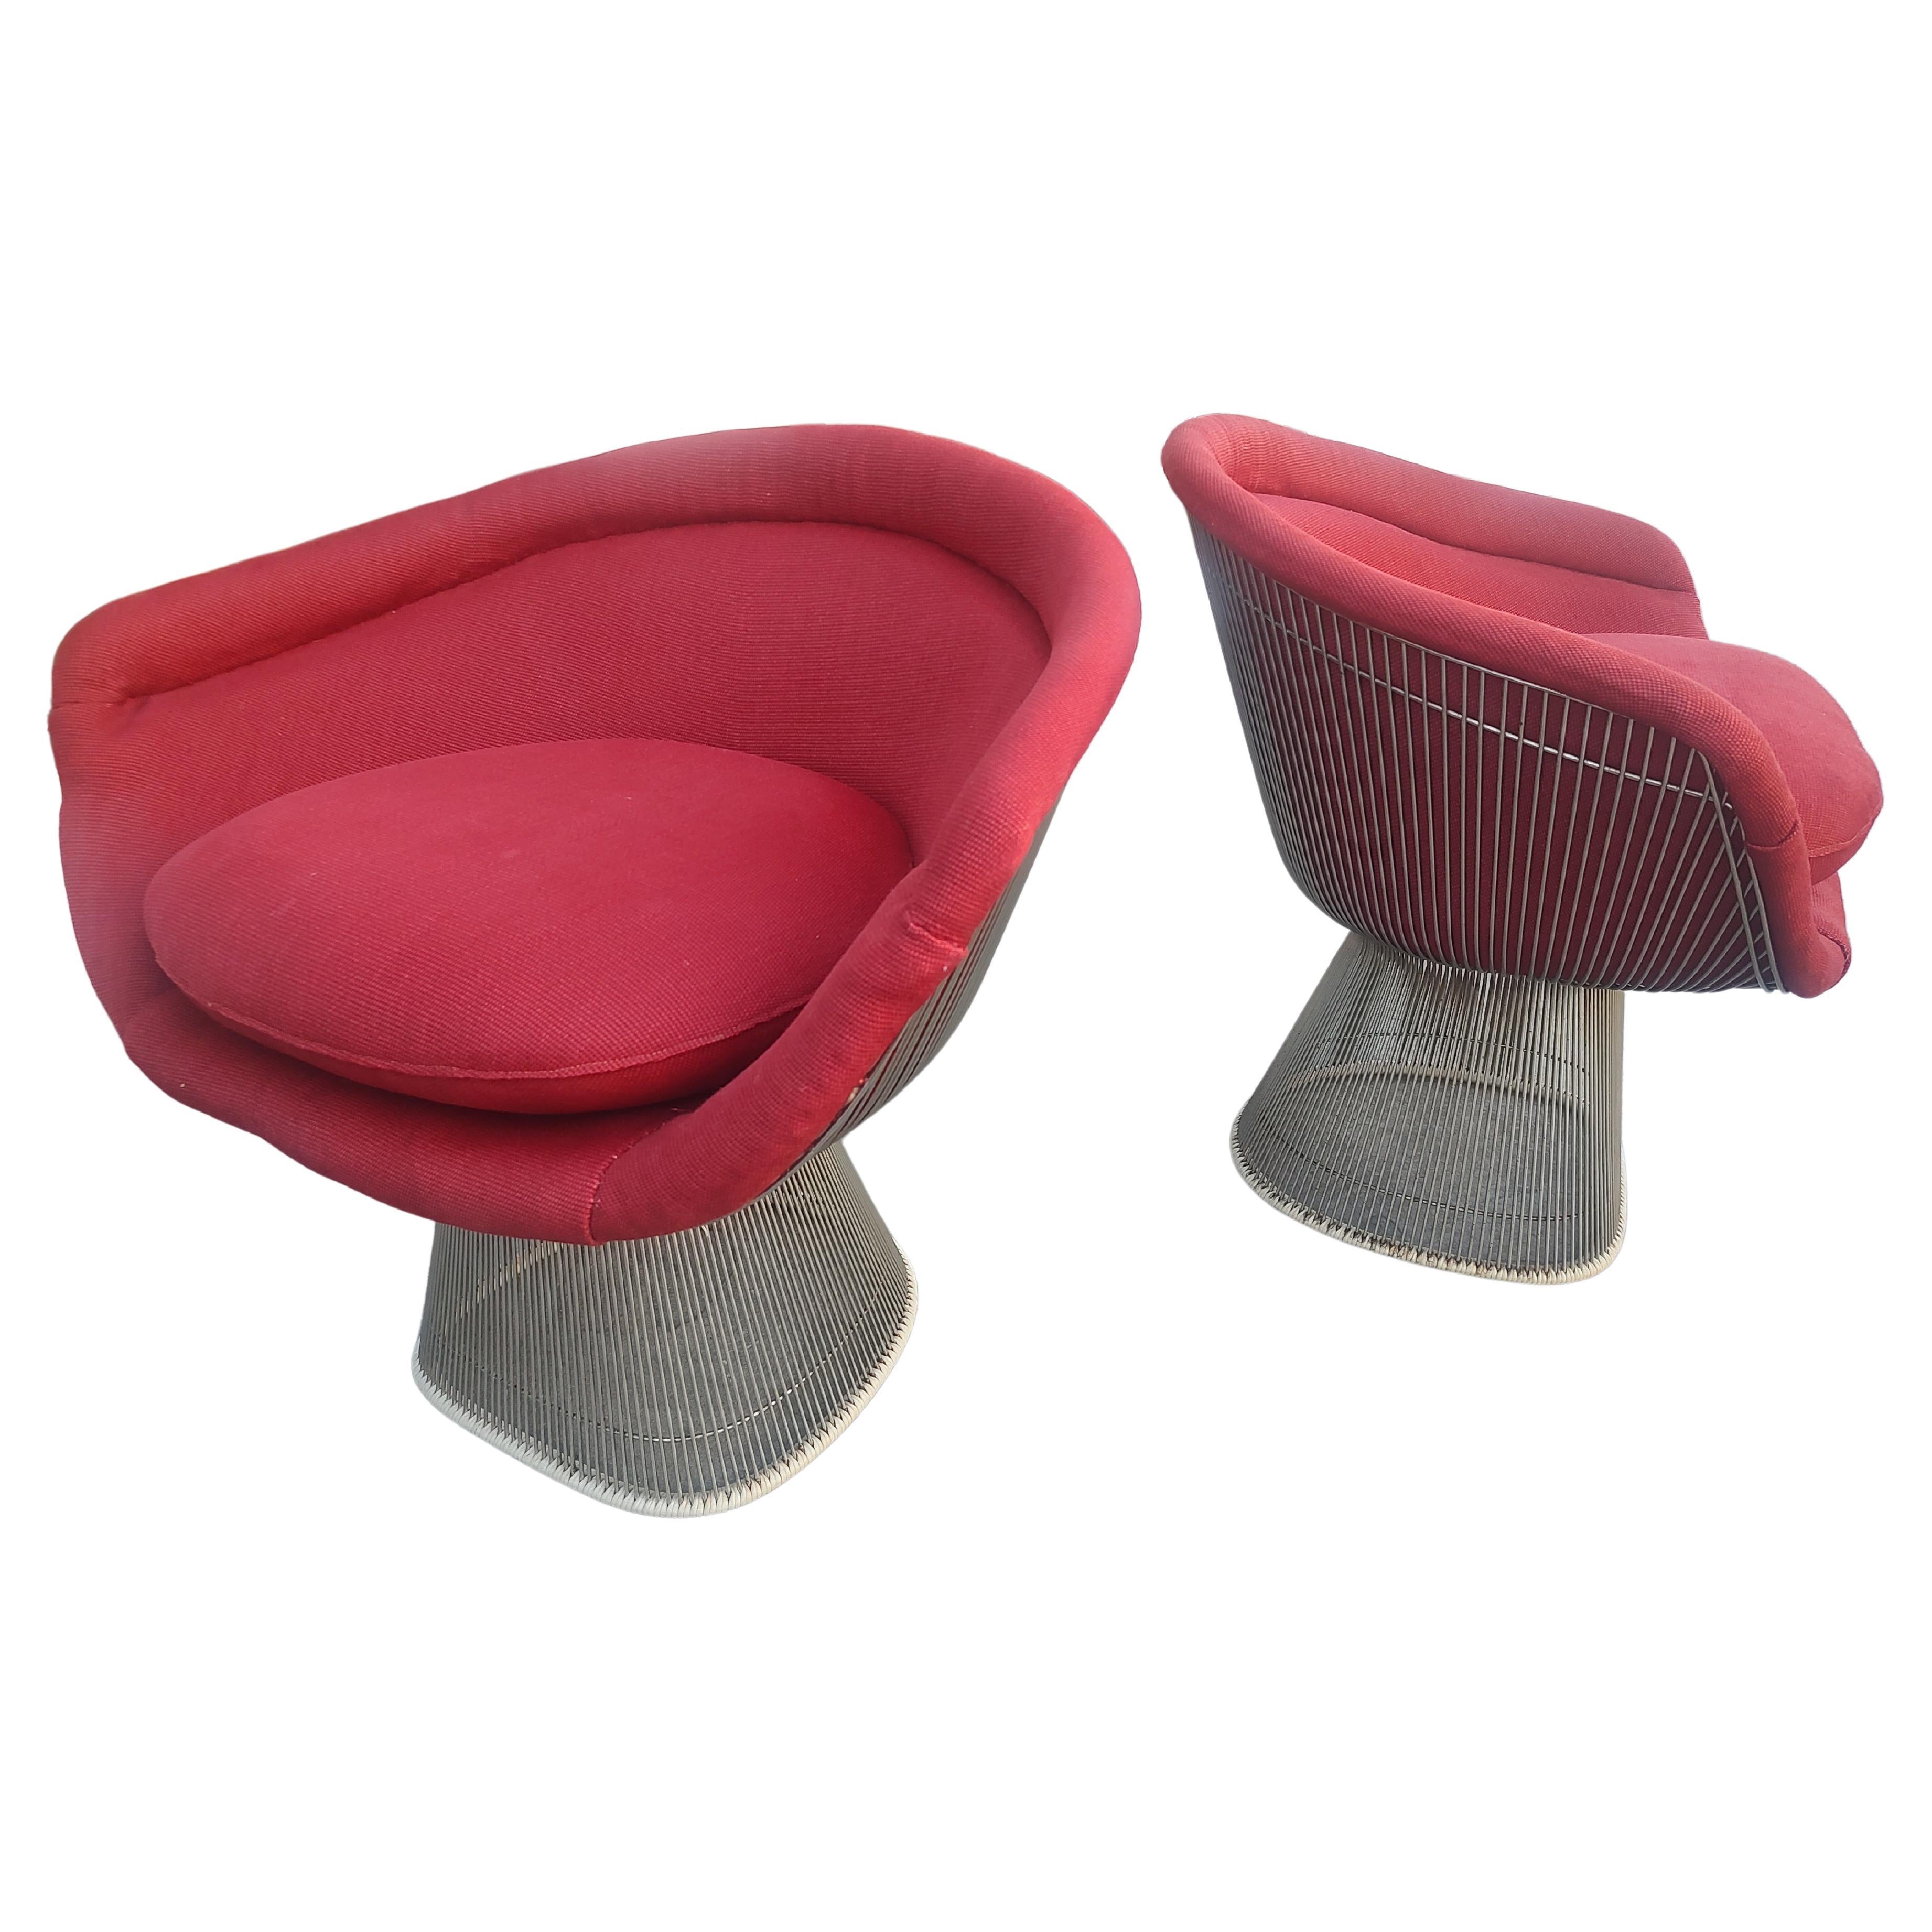 Pair of Warren Platner Mid Century Modern Lounge Chairs for Knoll C1965 For Sale